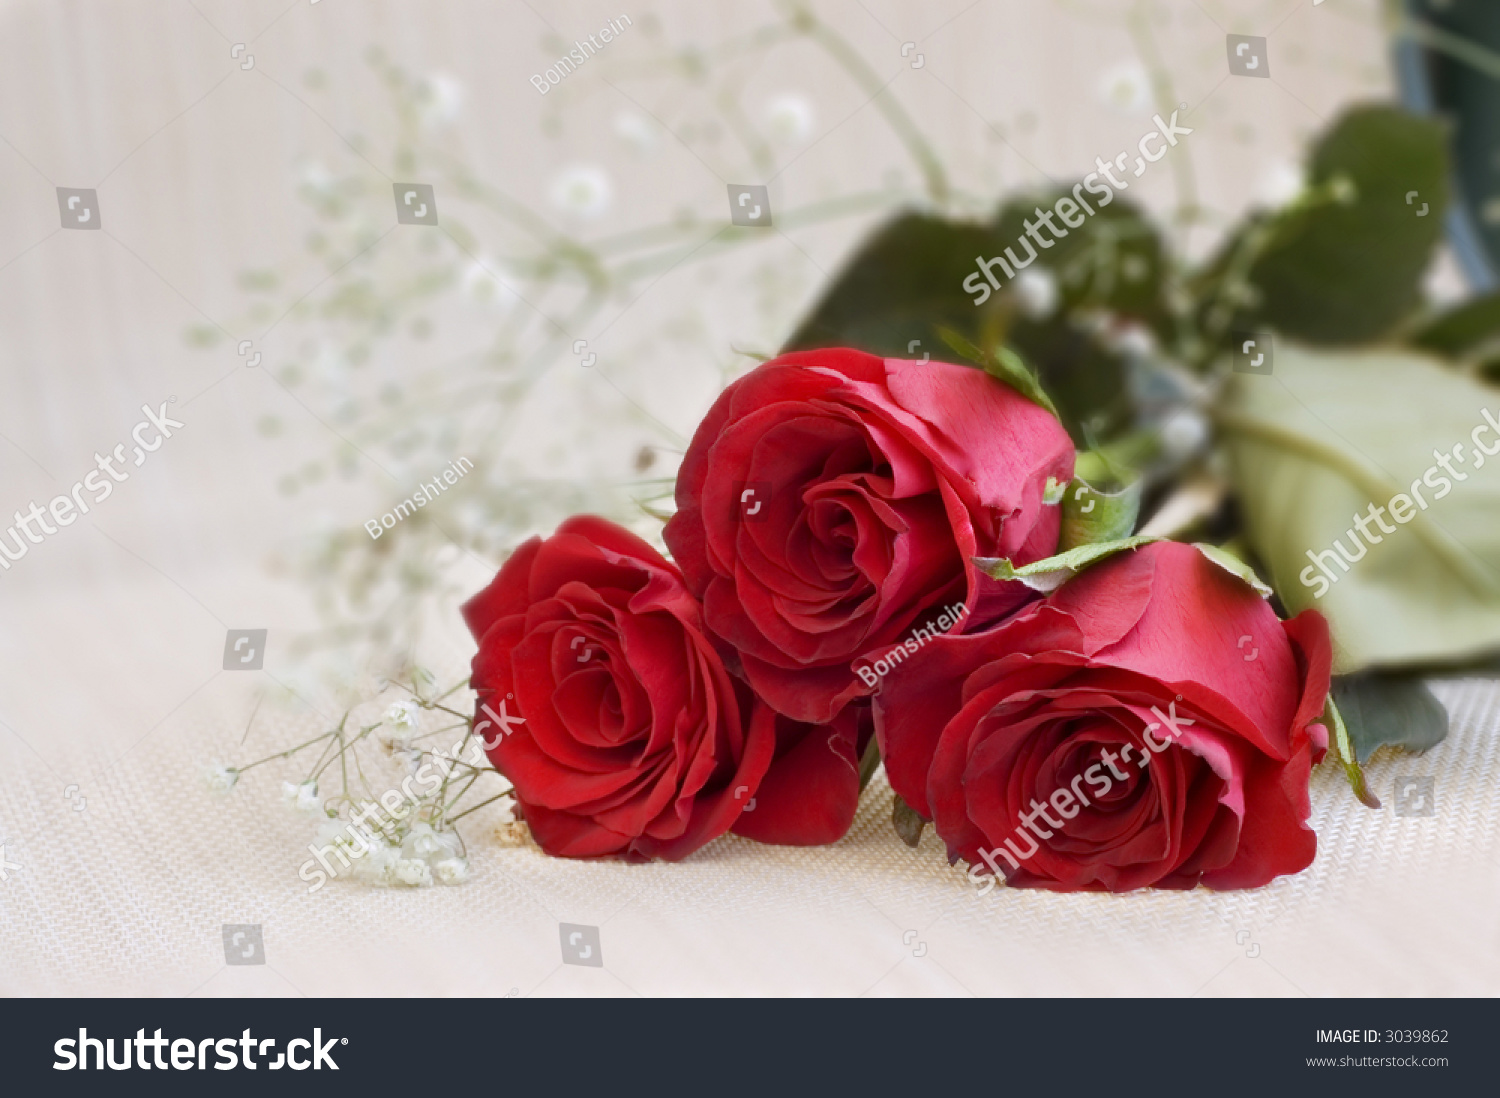 Bundle Of Red Roses Stock Photo 3039862 : Shutterstock